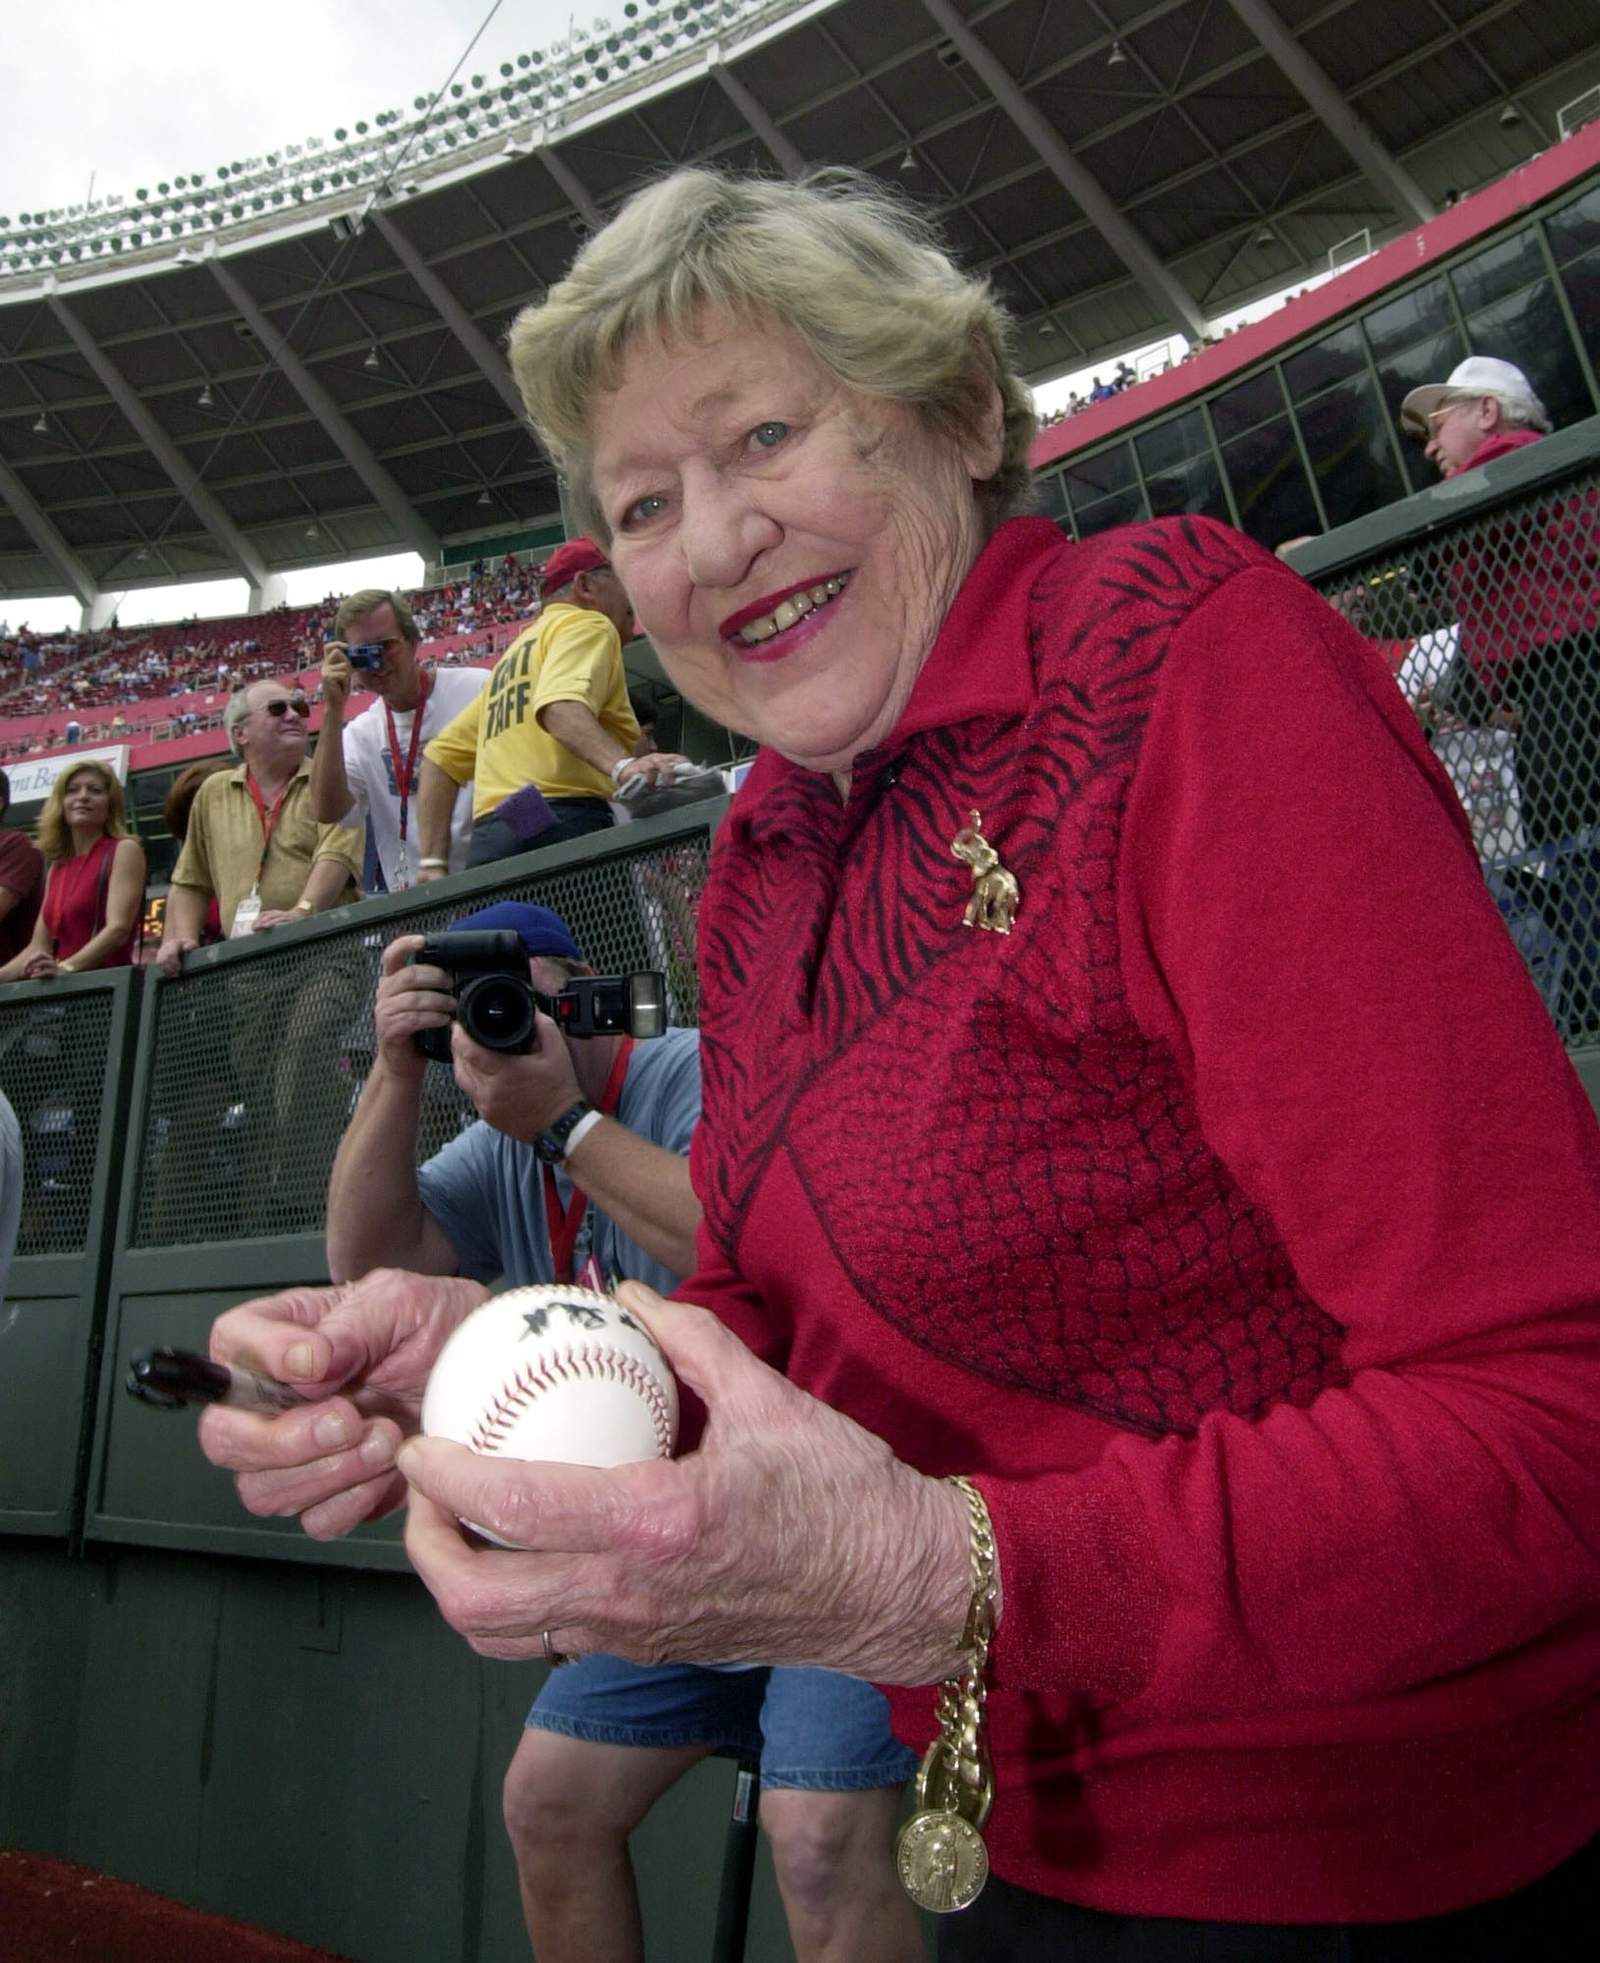 What's in a name? Cincinnati grapples with Marge Schott